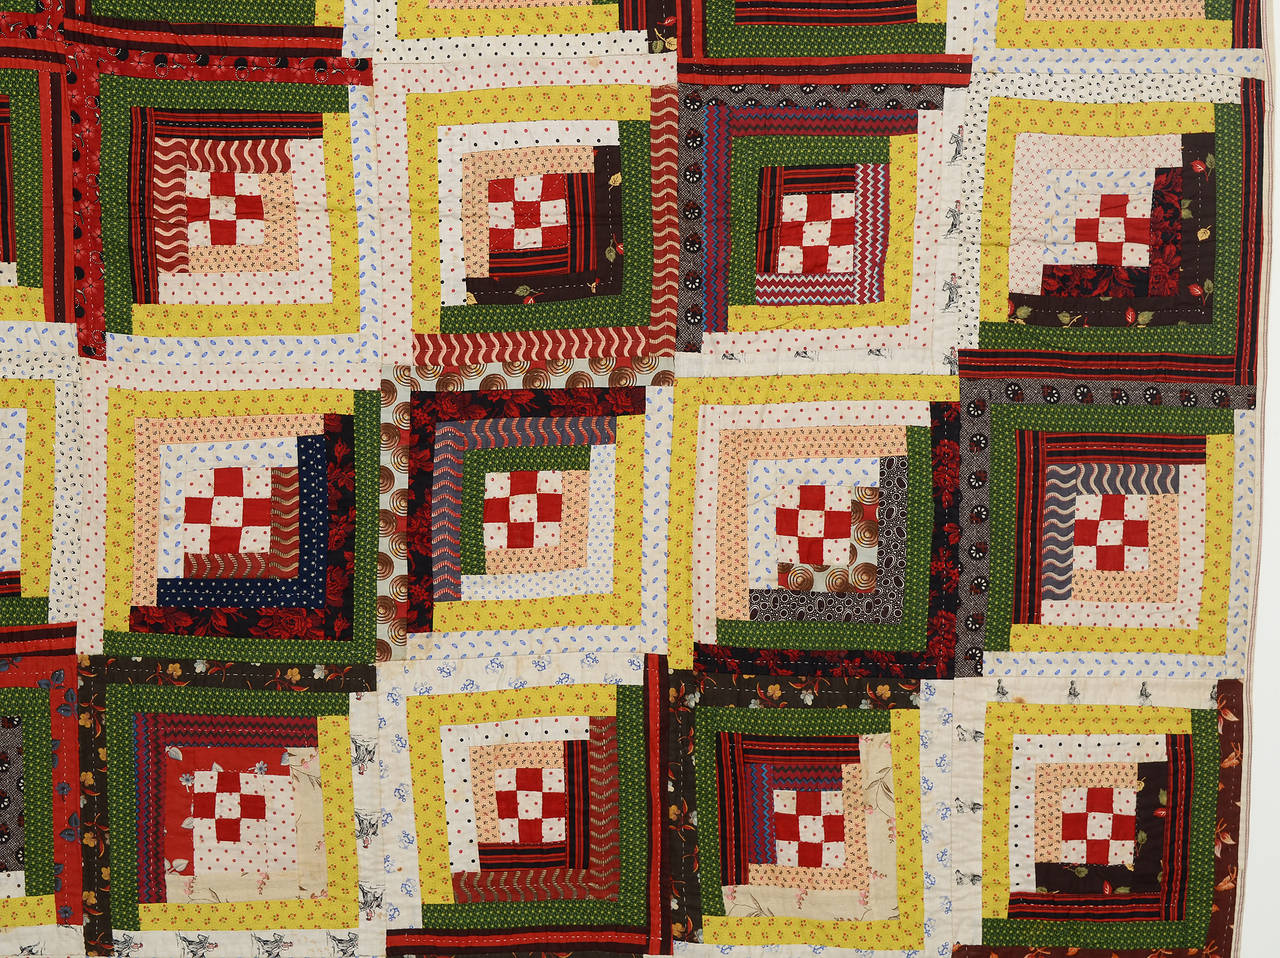 Patchwork Barnraising Log Cabin Quilt with Nine Patch Centers